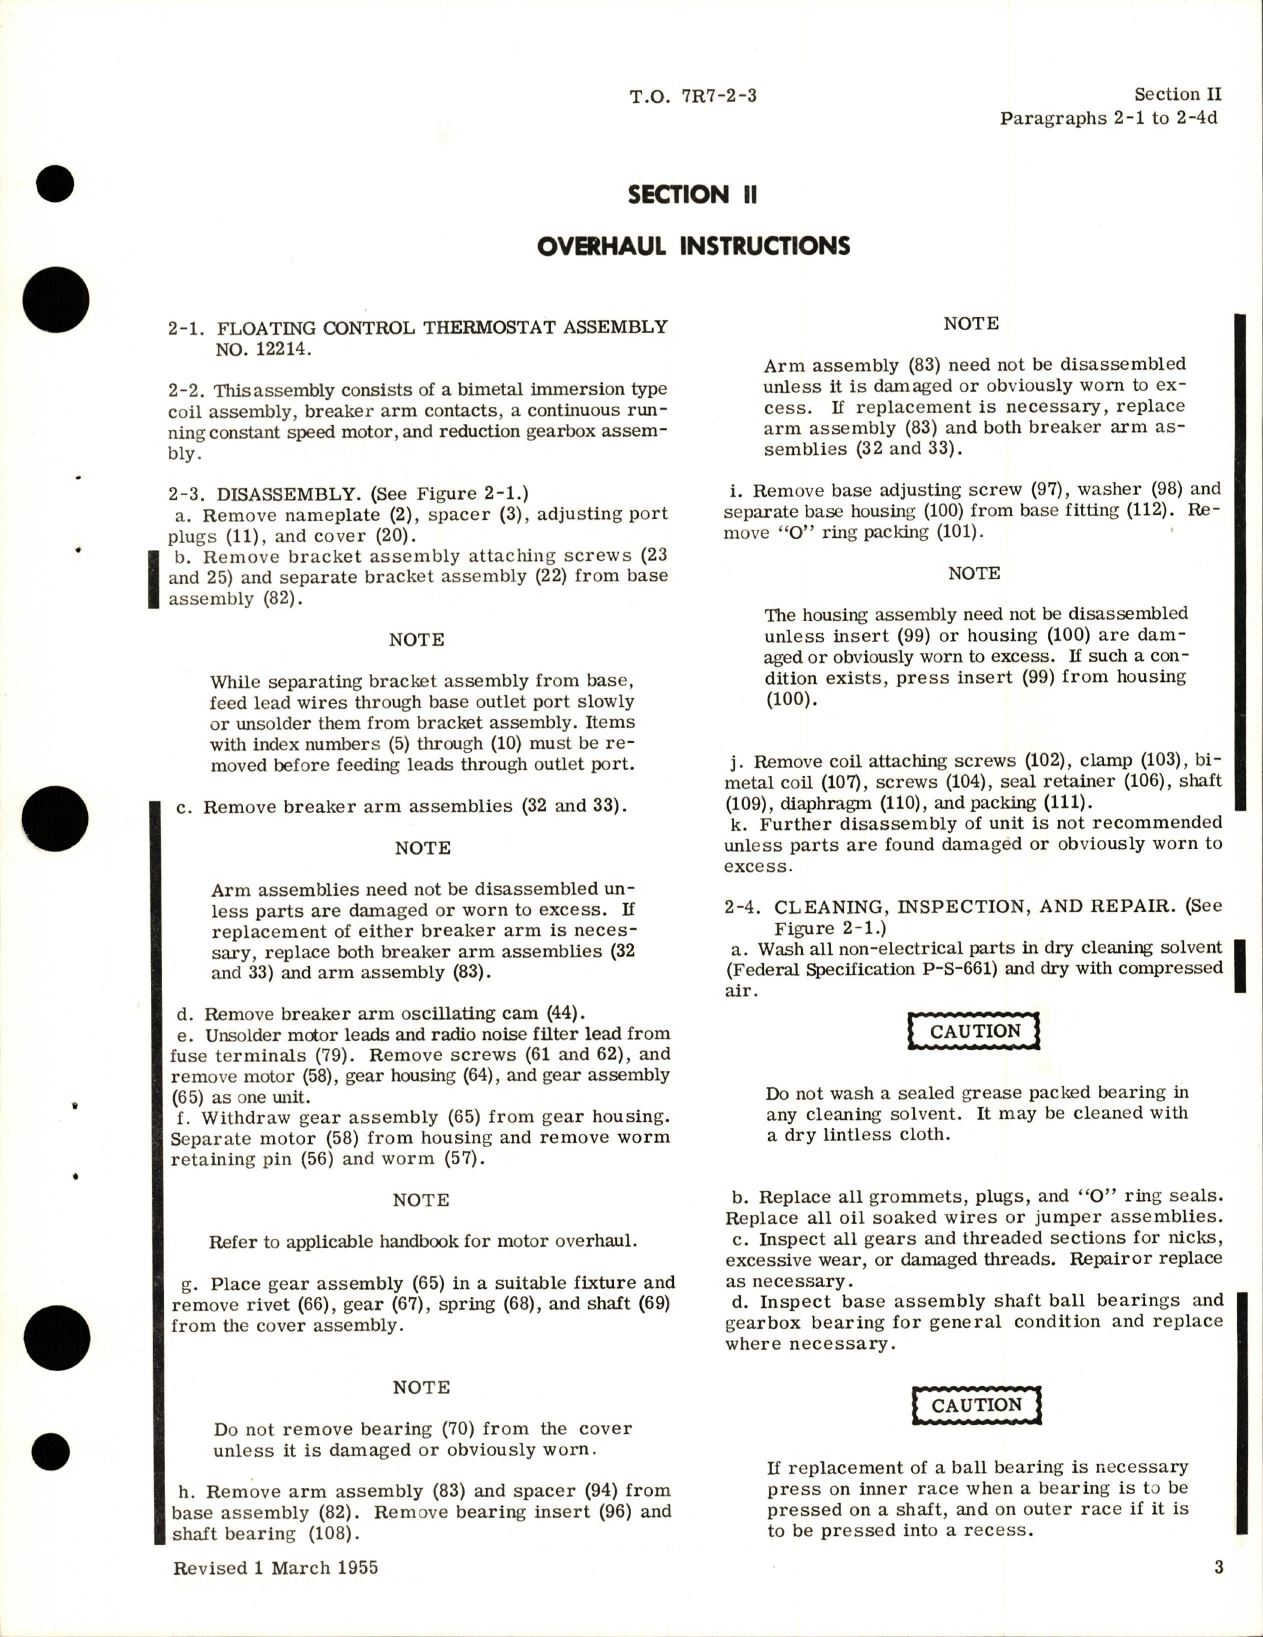 Sample page 7 from AirCorps Library document: Overhaul Instructions for Floating Control Thermostats 